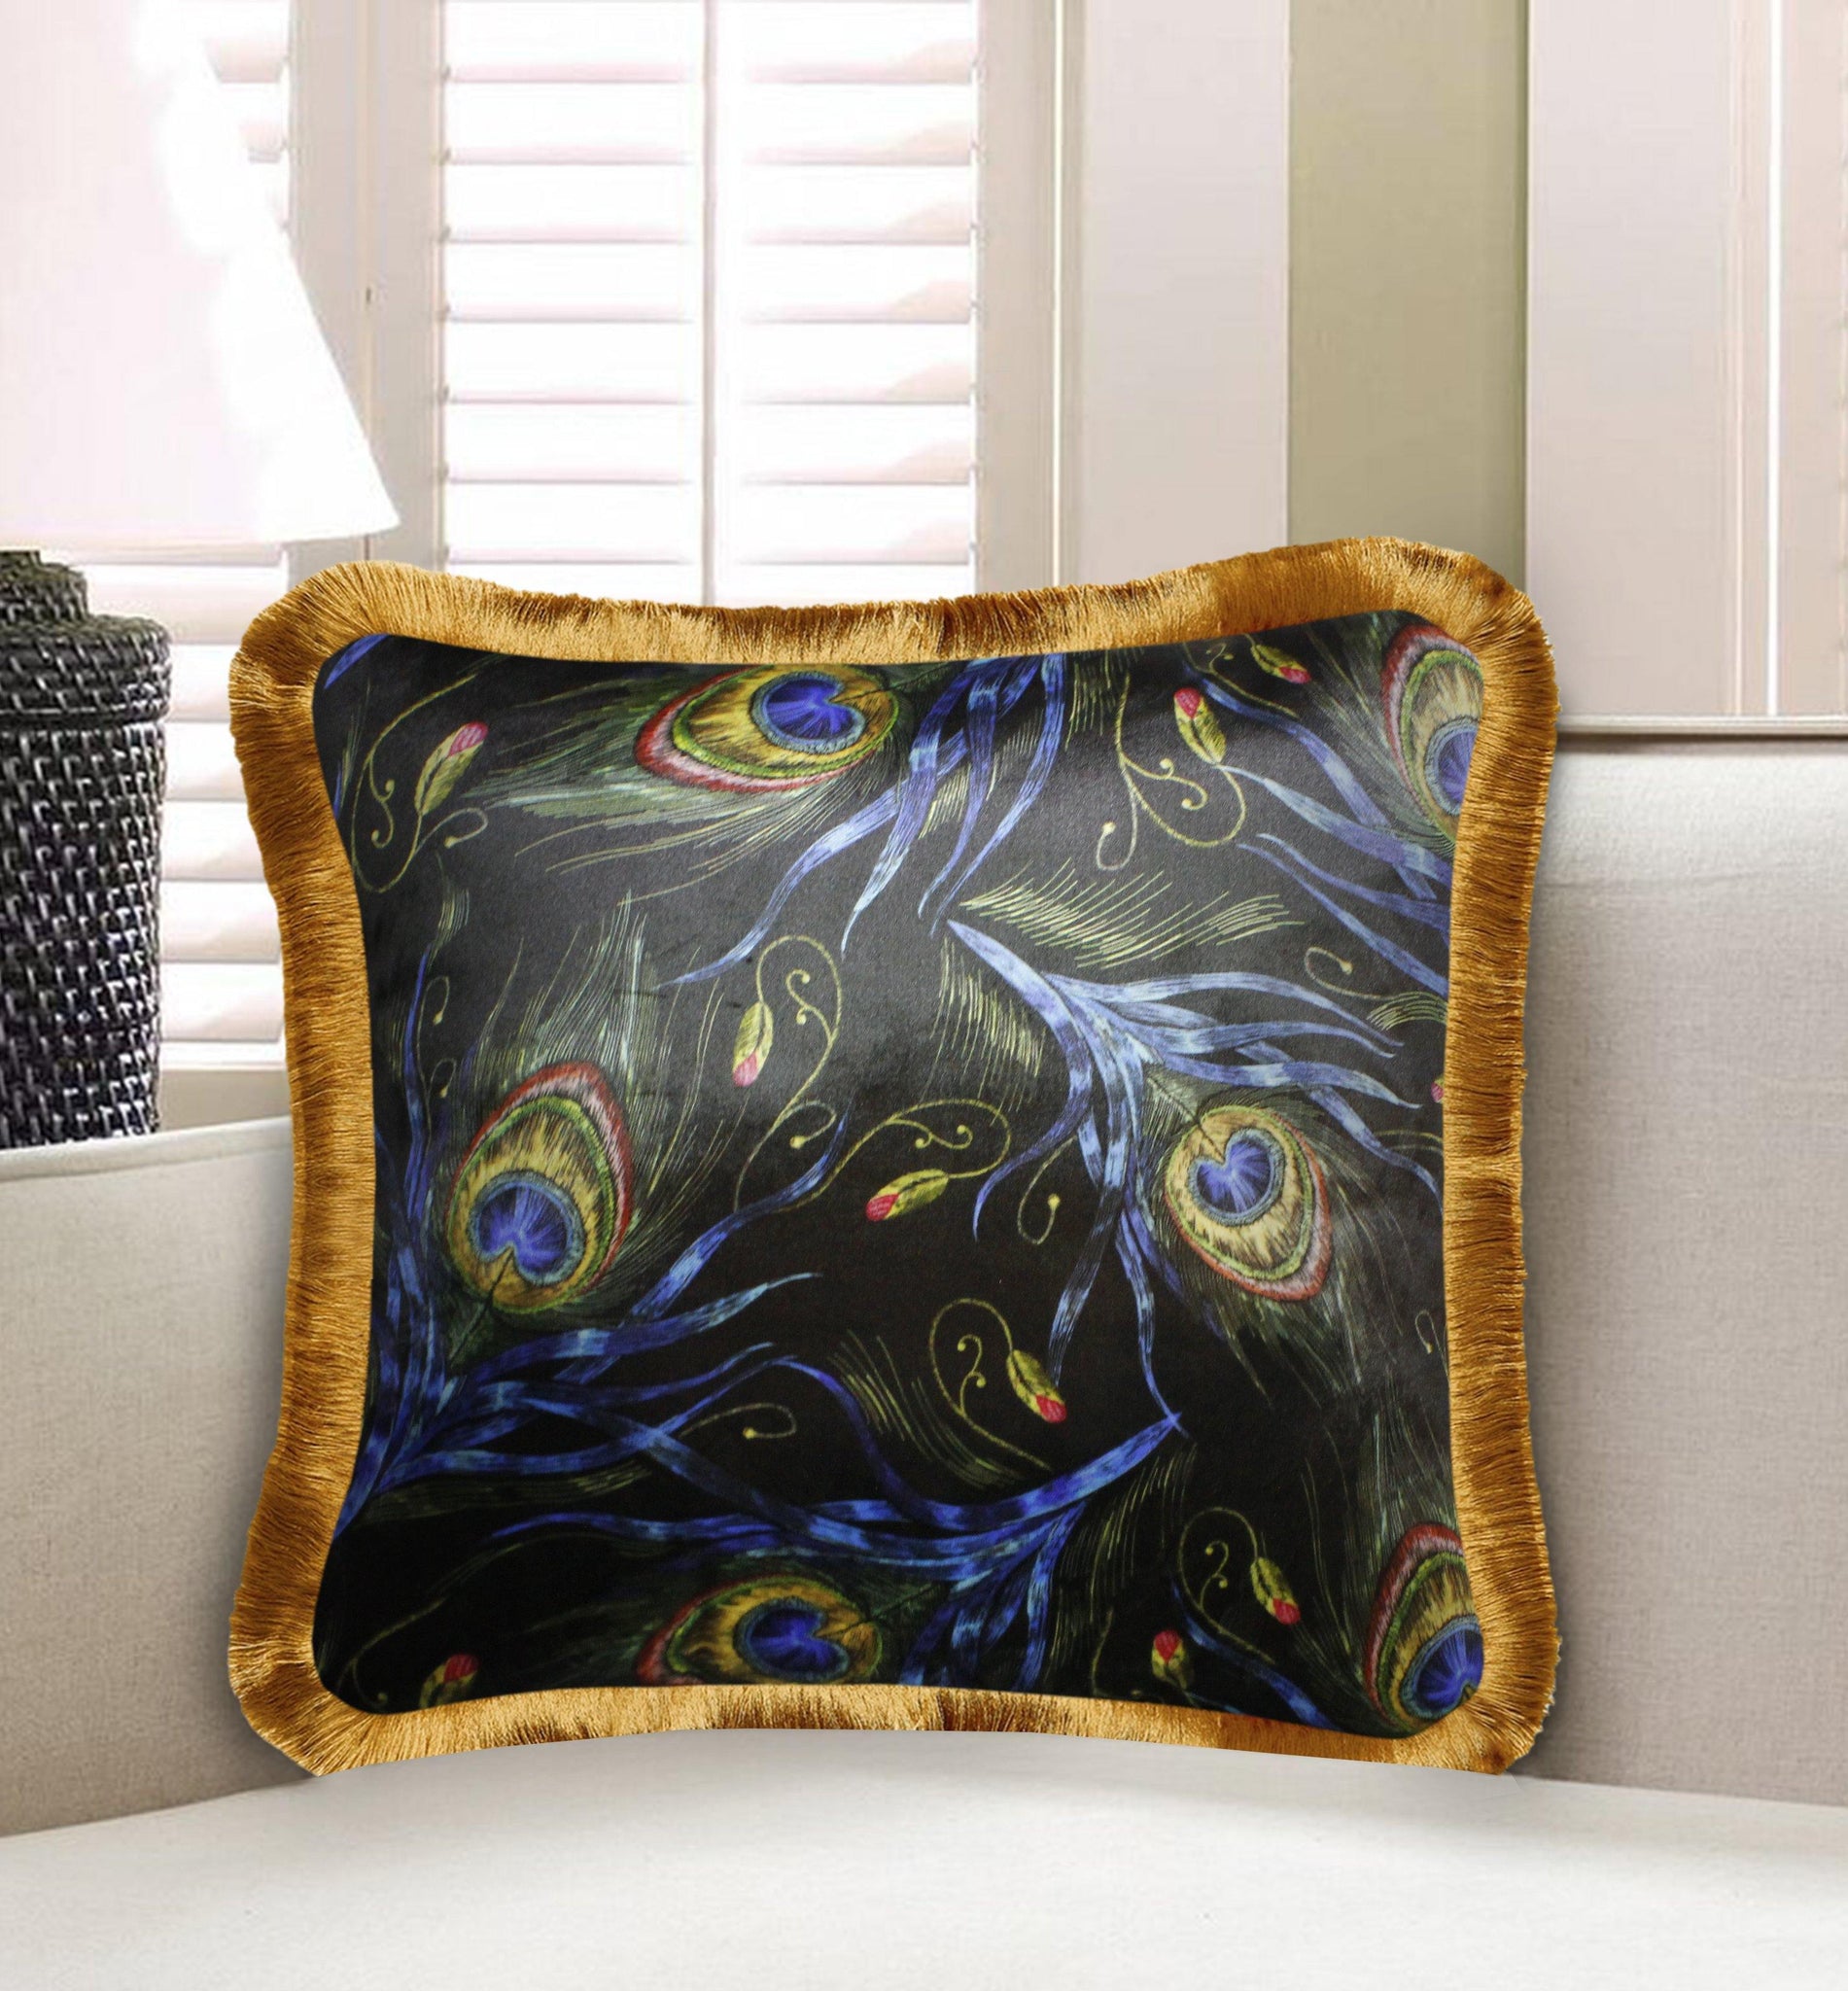 Black Velvet Cushion Cover Peacock Feather Decorative Pillowcase Home Decor Throw Pillow for Sofa Chair Couch Bedroom 45x45 cm 18x18 In